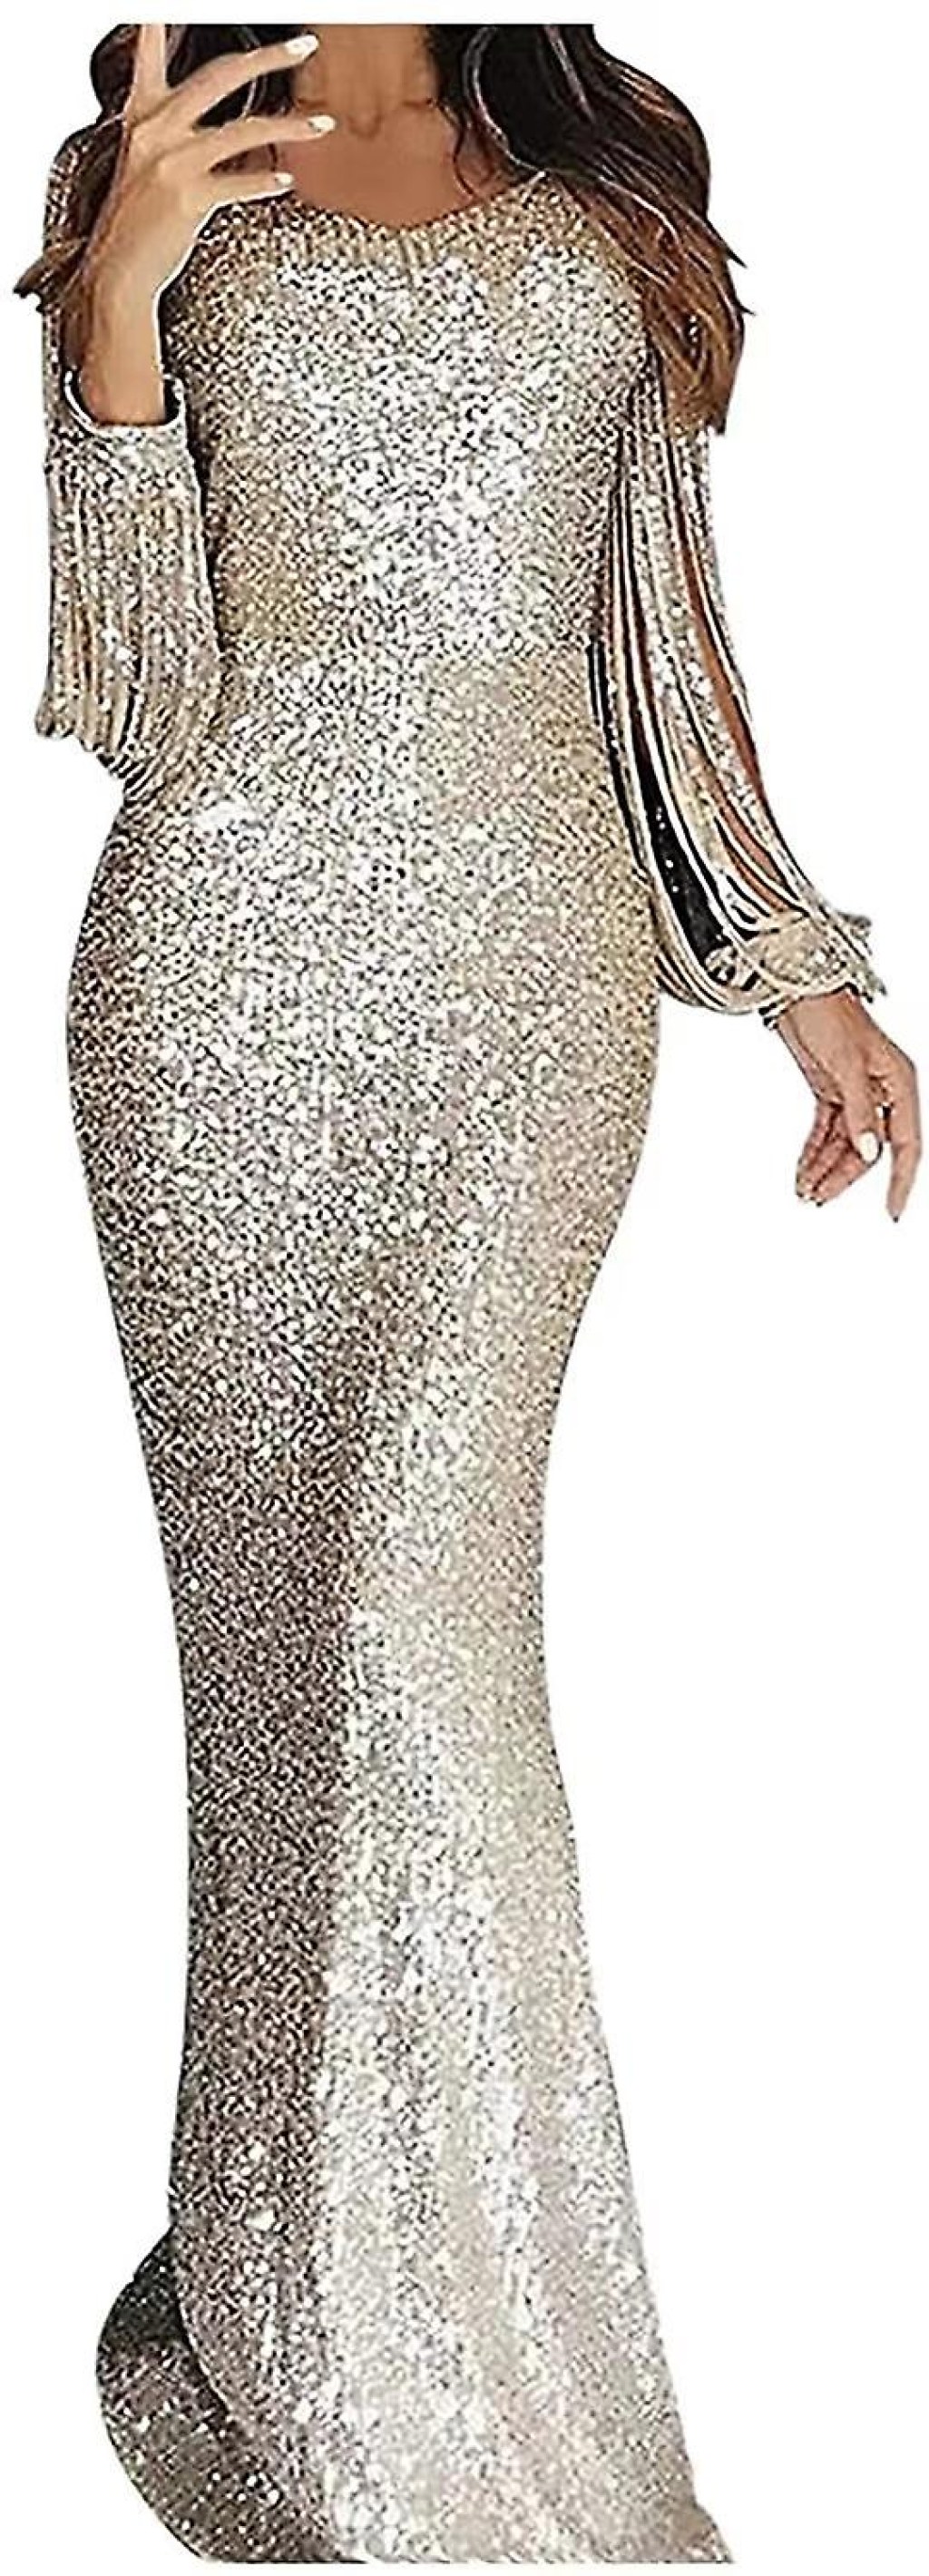 Picture of: Womens Shiny Evening Dress Tassel Long Sleeve Prom Gown  Fruugo DE